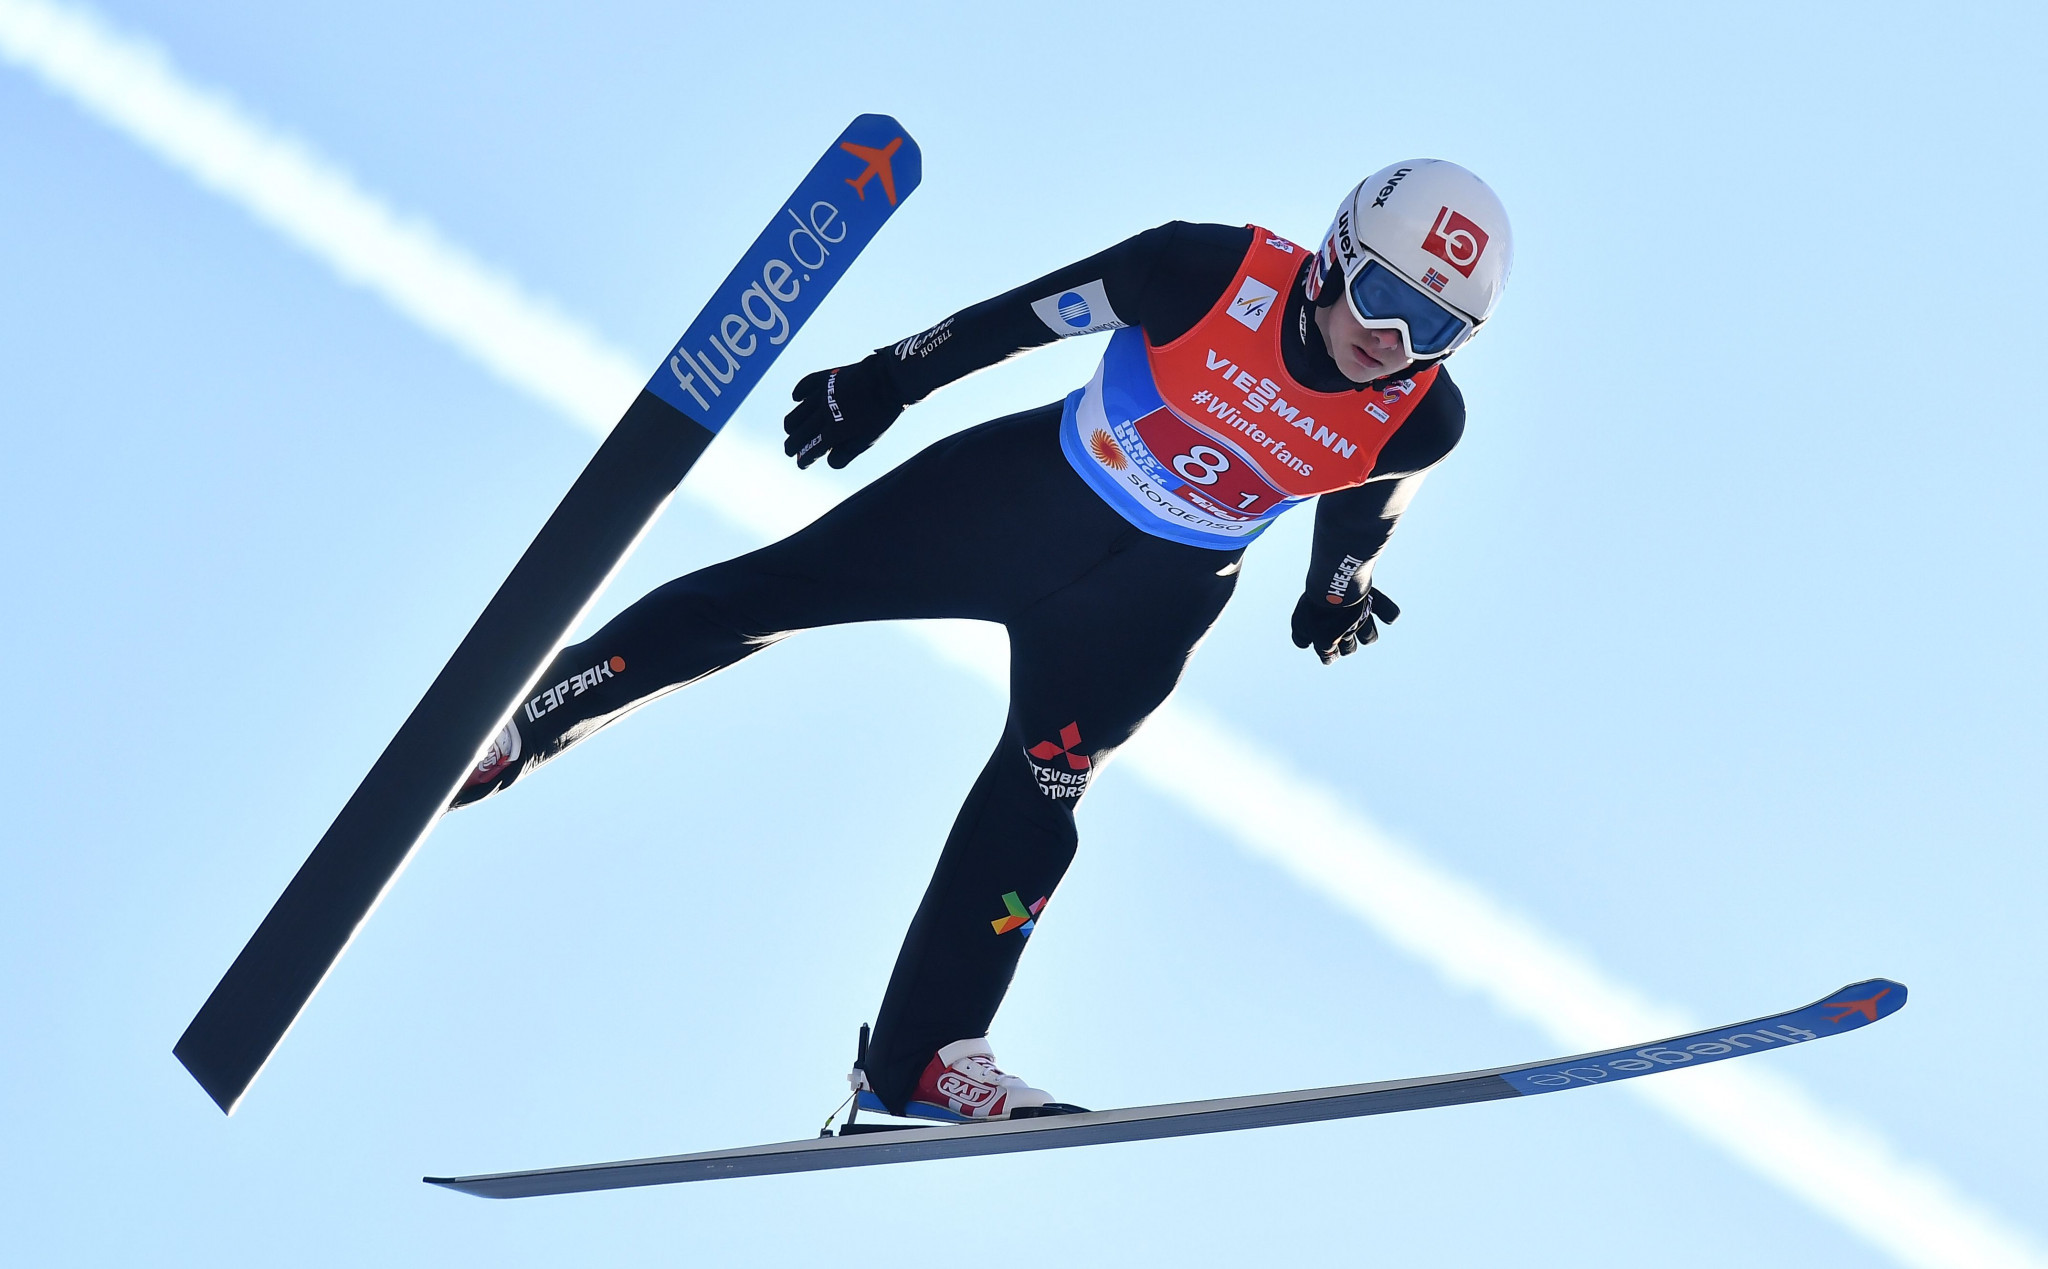 Granerud tops qualifying at FIS Ski Jumping World Cup in Titisee-Neustadt